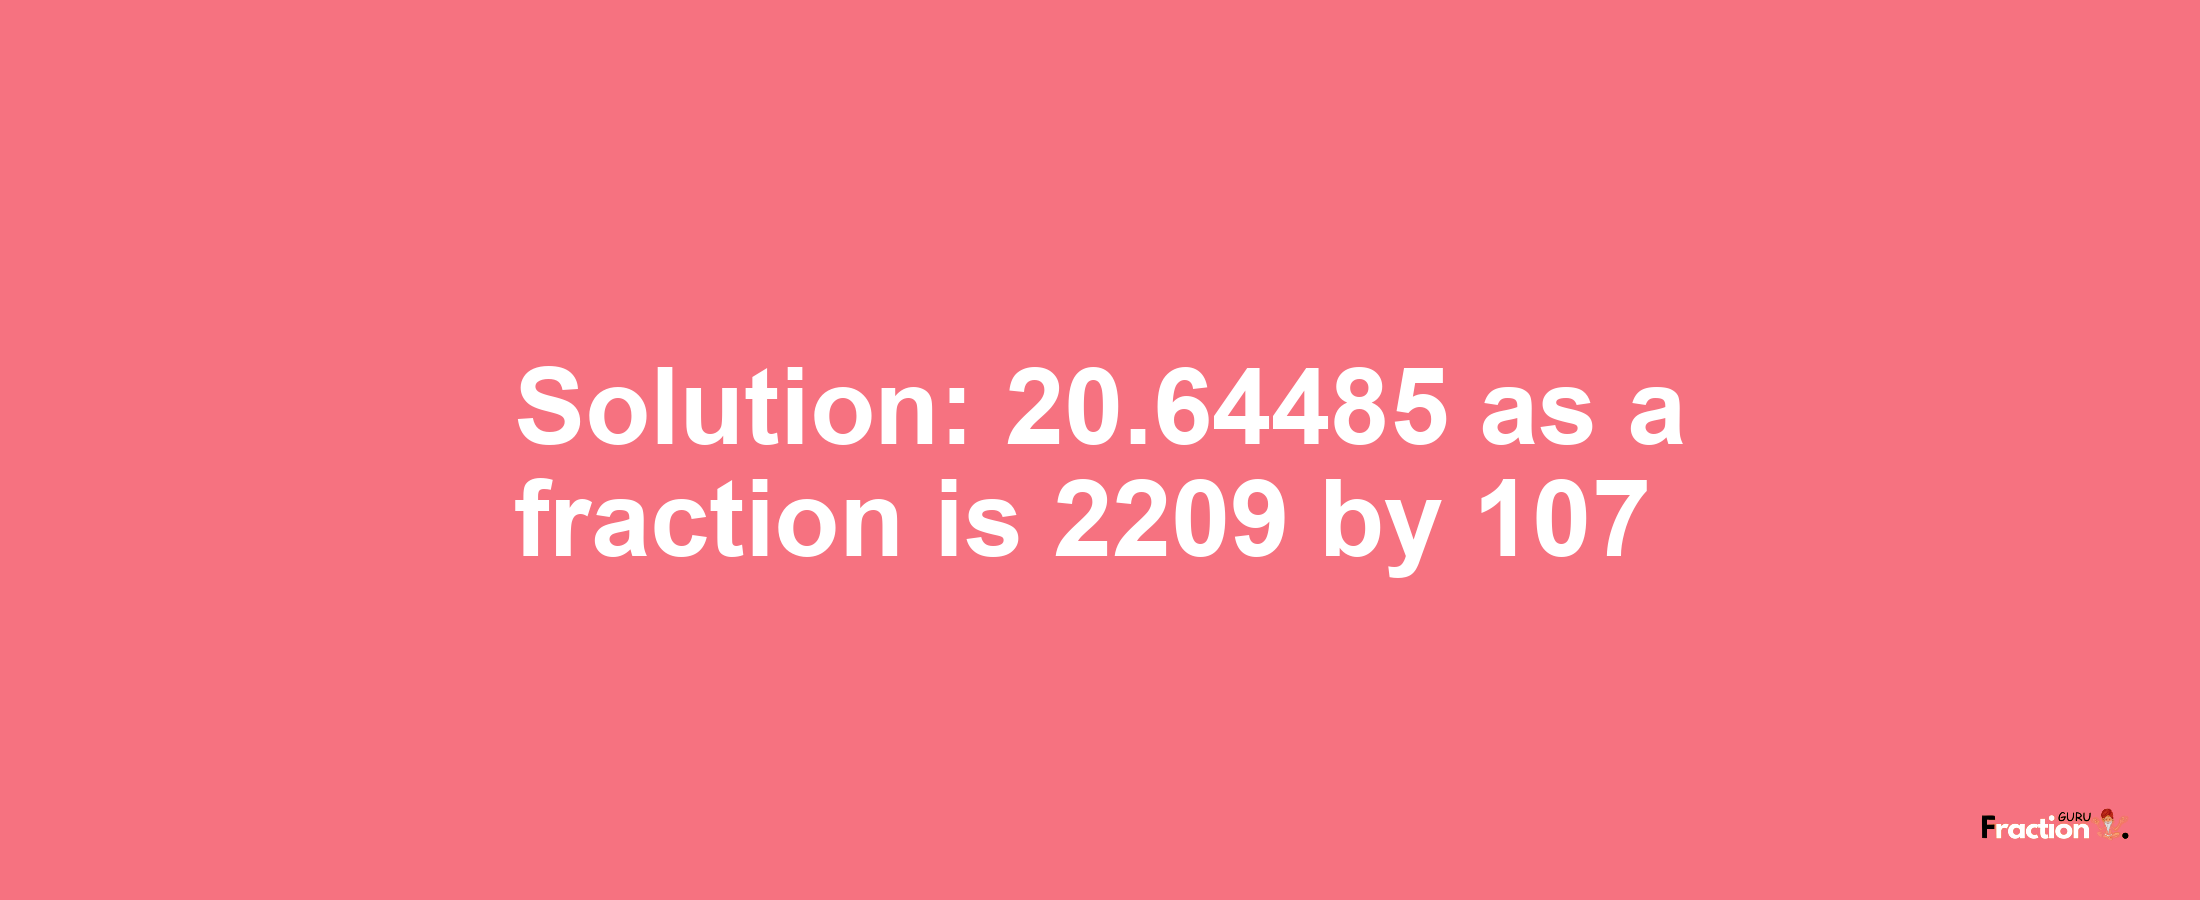 Solution:20.64485 as a fraction is 2209/107